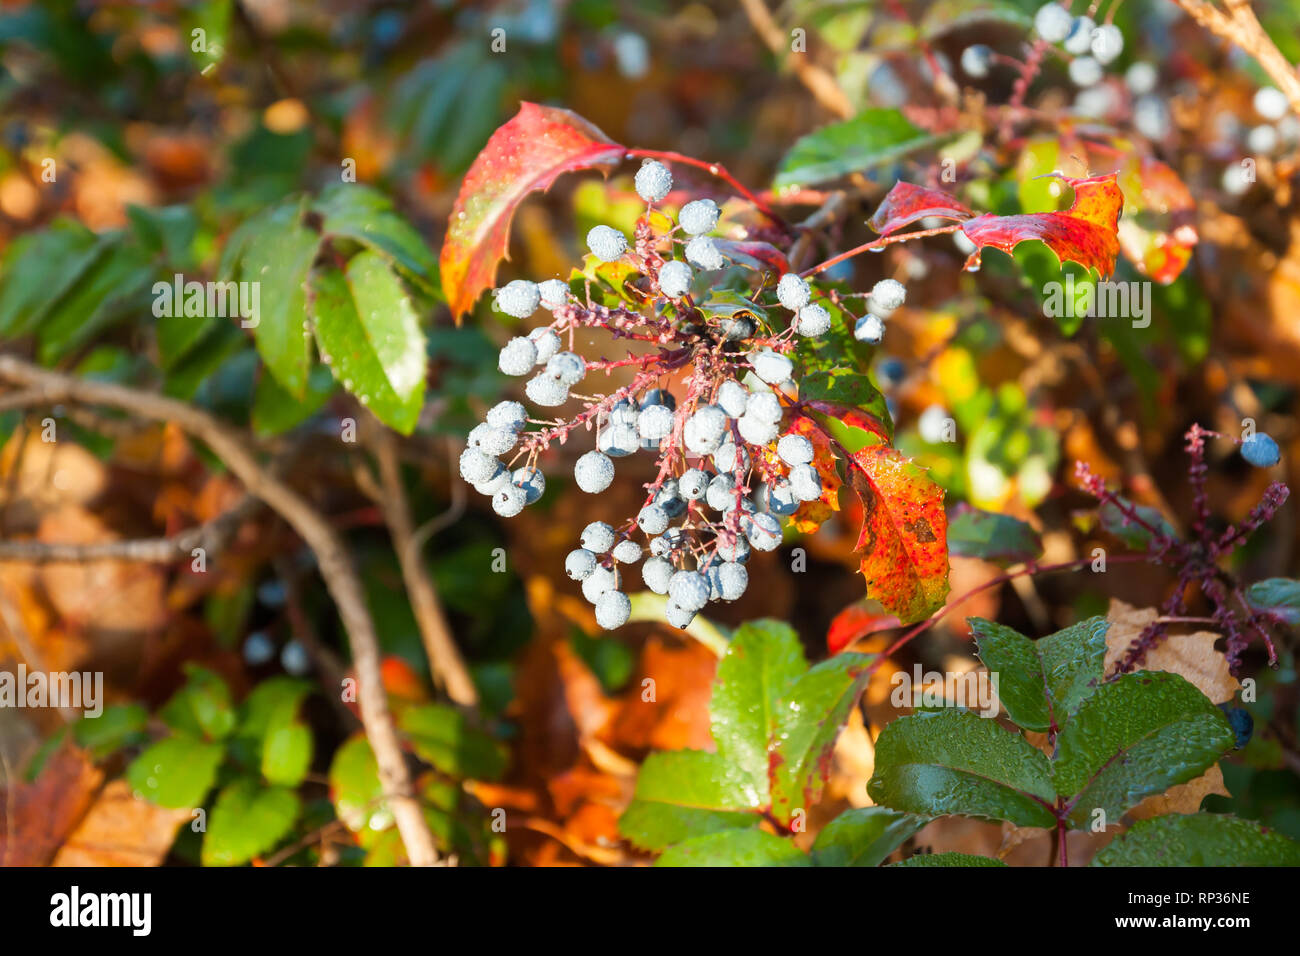 Shrub with blue berries of berberis with dew drops in Finland at autumn. Stock Photo